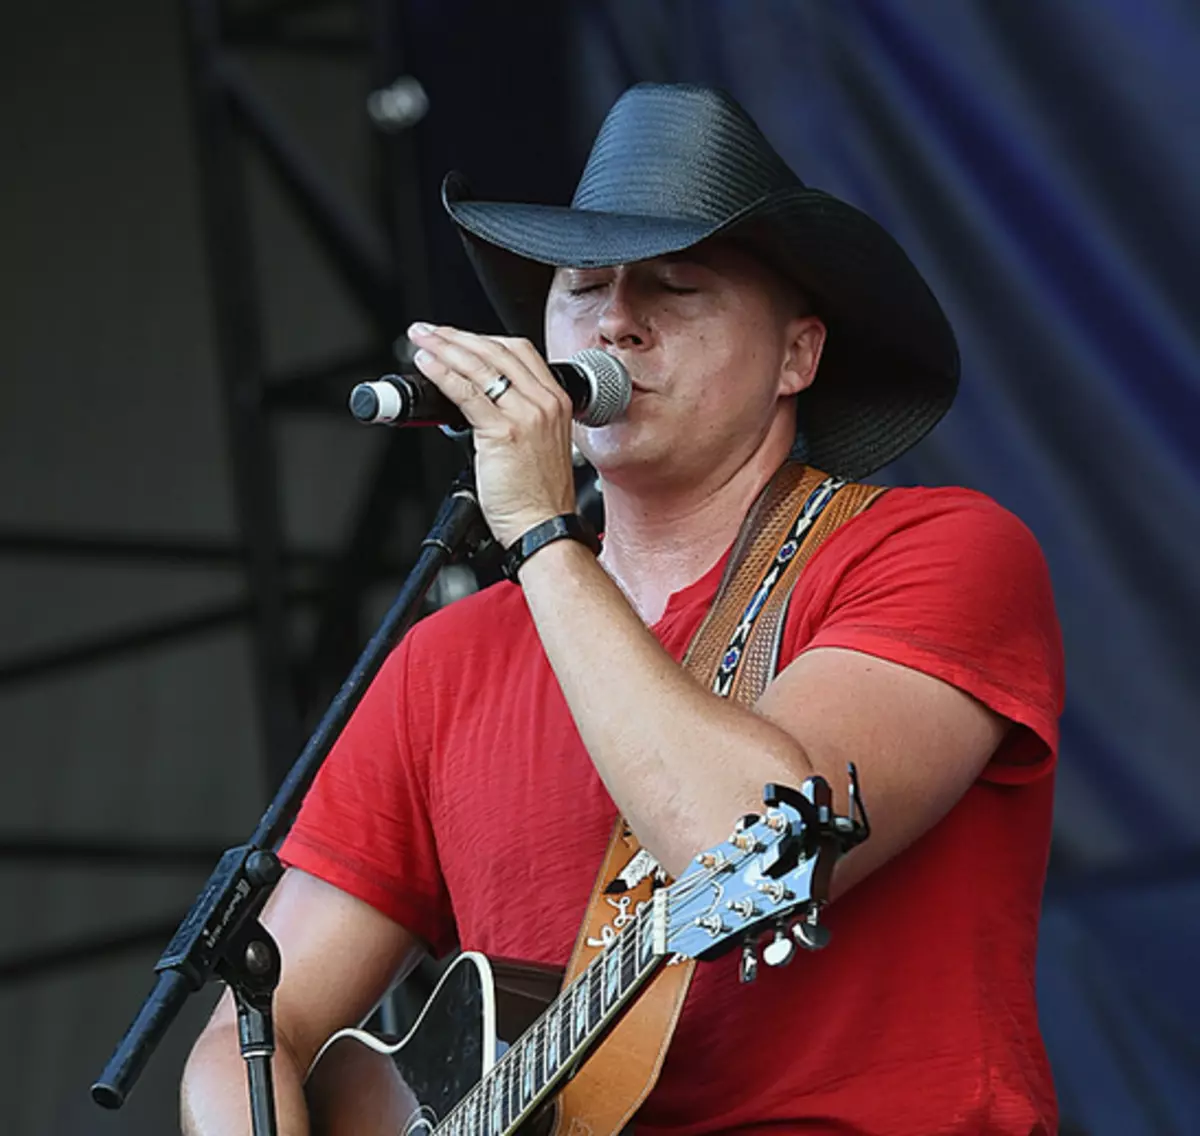 Frank Foster to Perform at State Fair of Louisiana Oct. 27